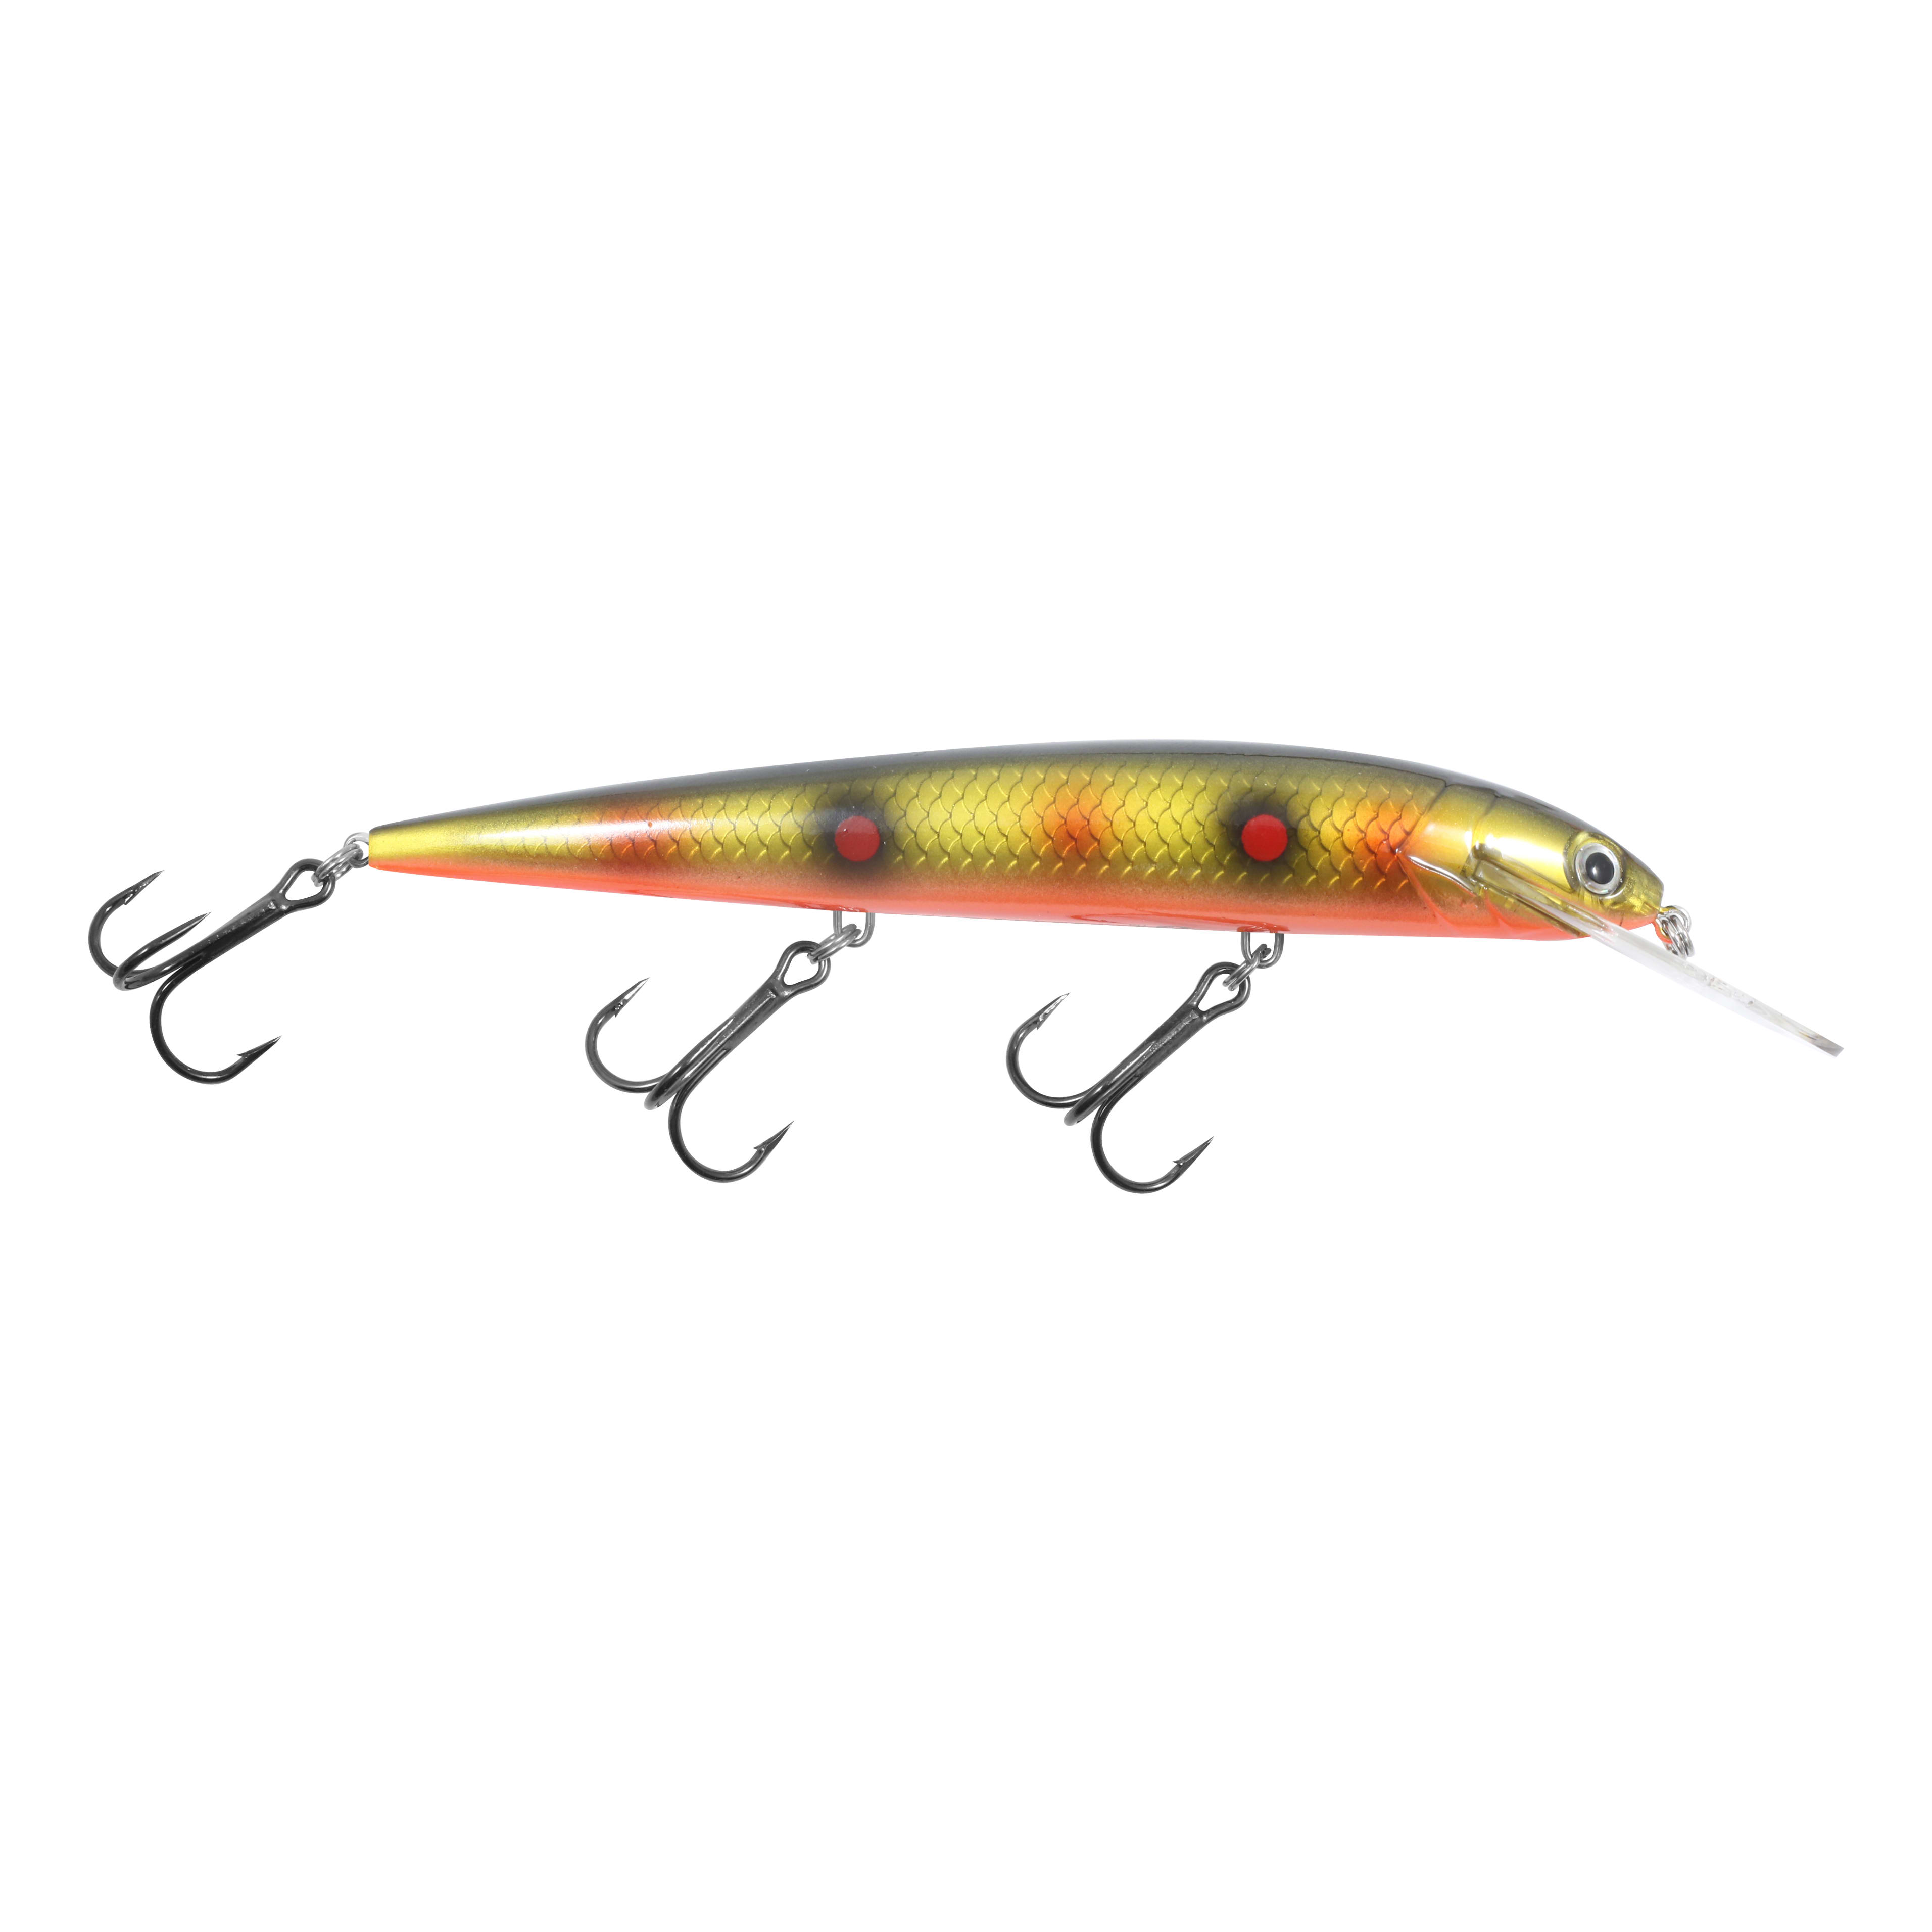 Northland® Rumble B - Spotted Lava - 3 Hook